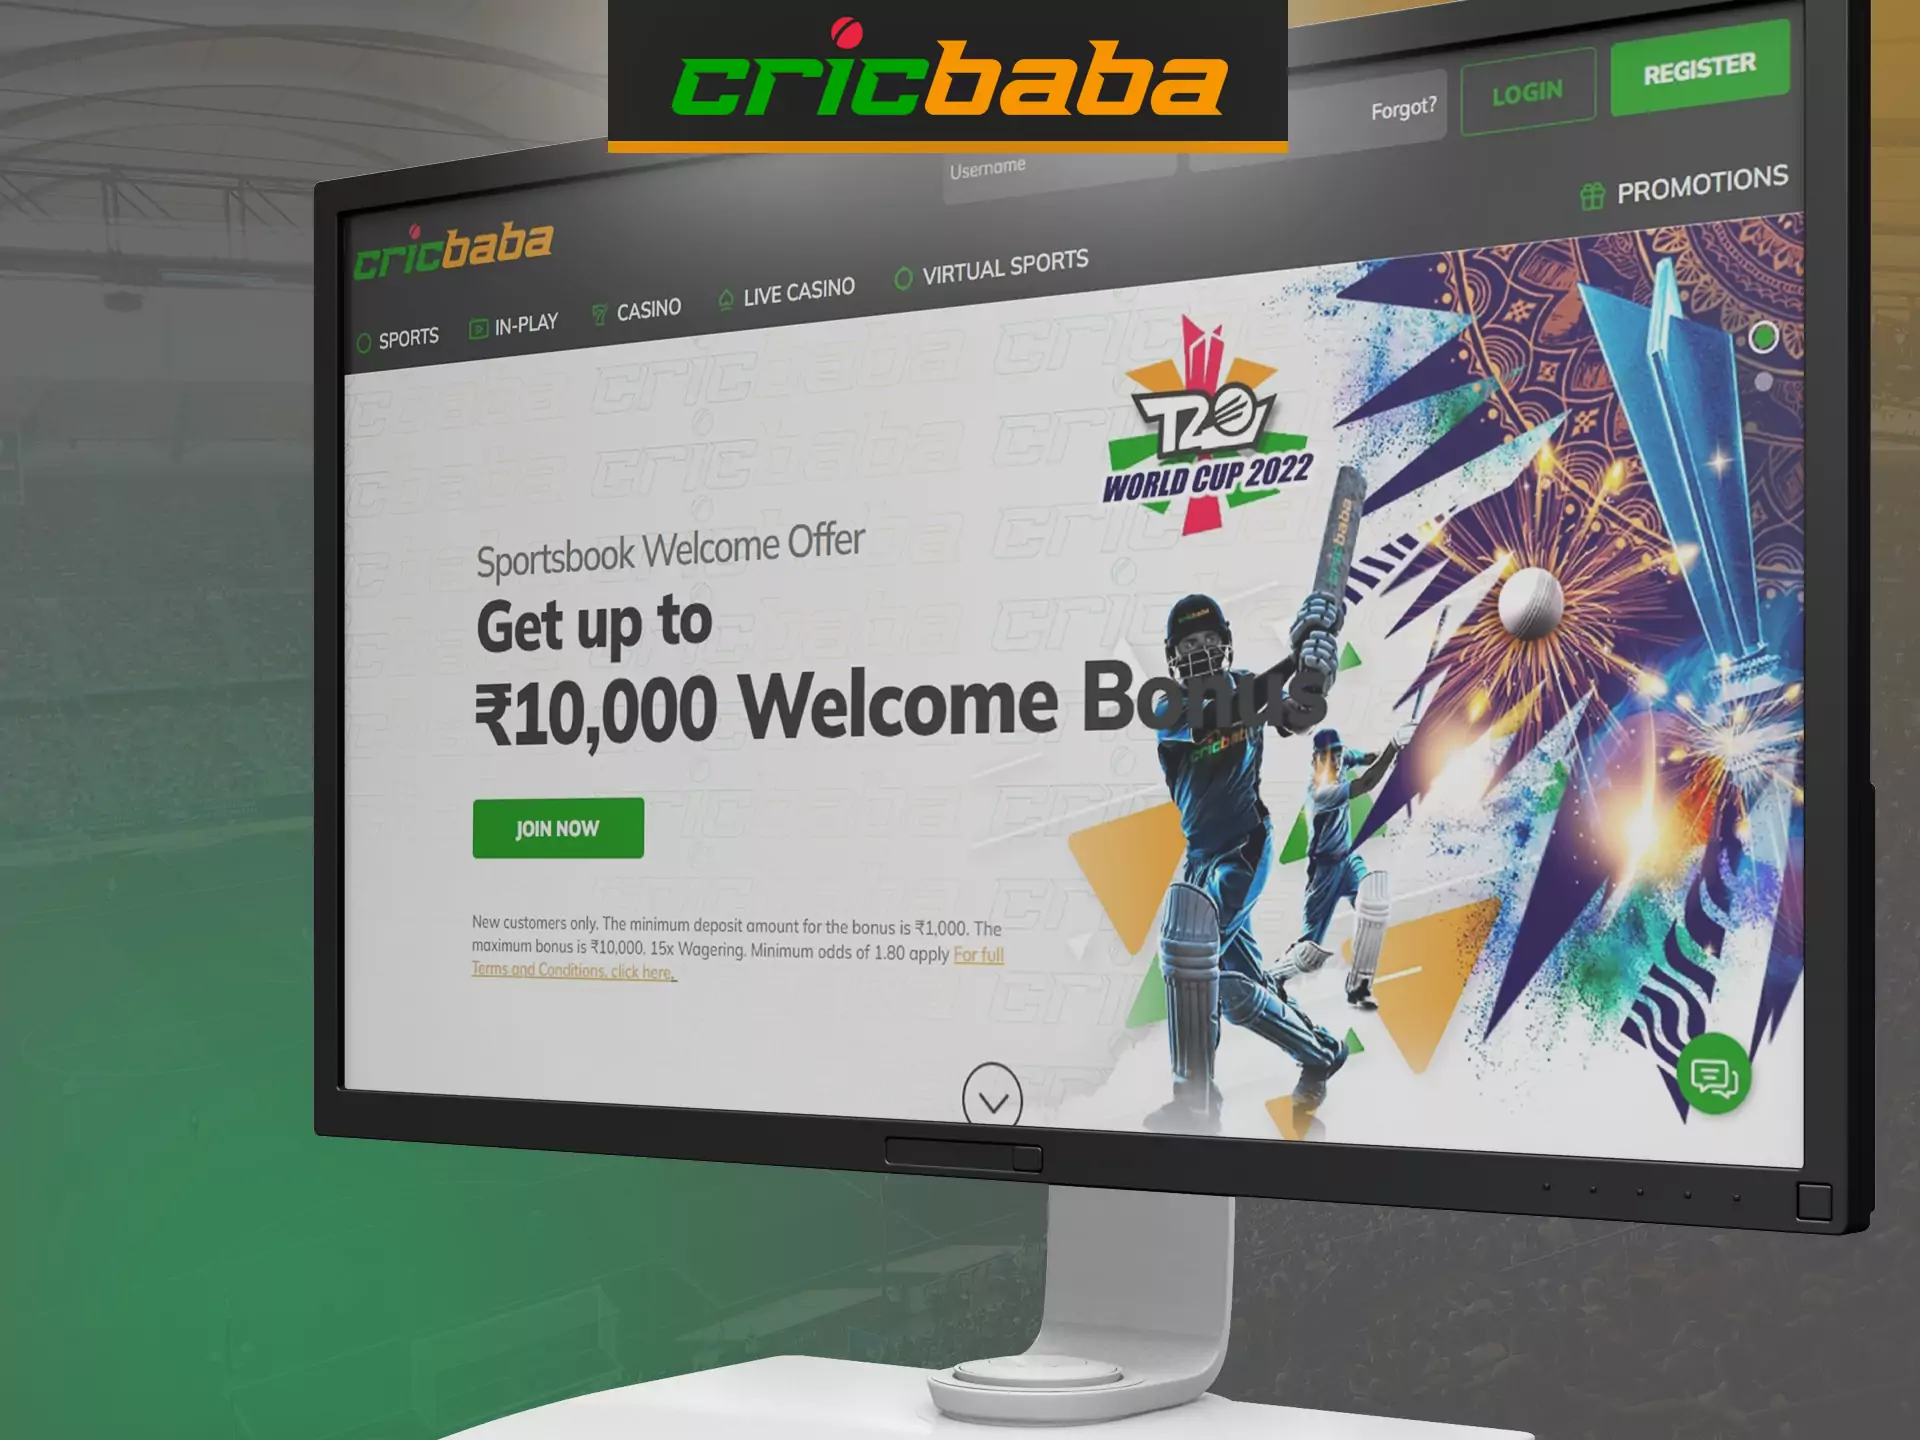 Place bets on Cricbaba on your comfortable personal computer.